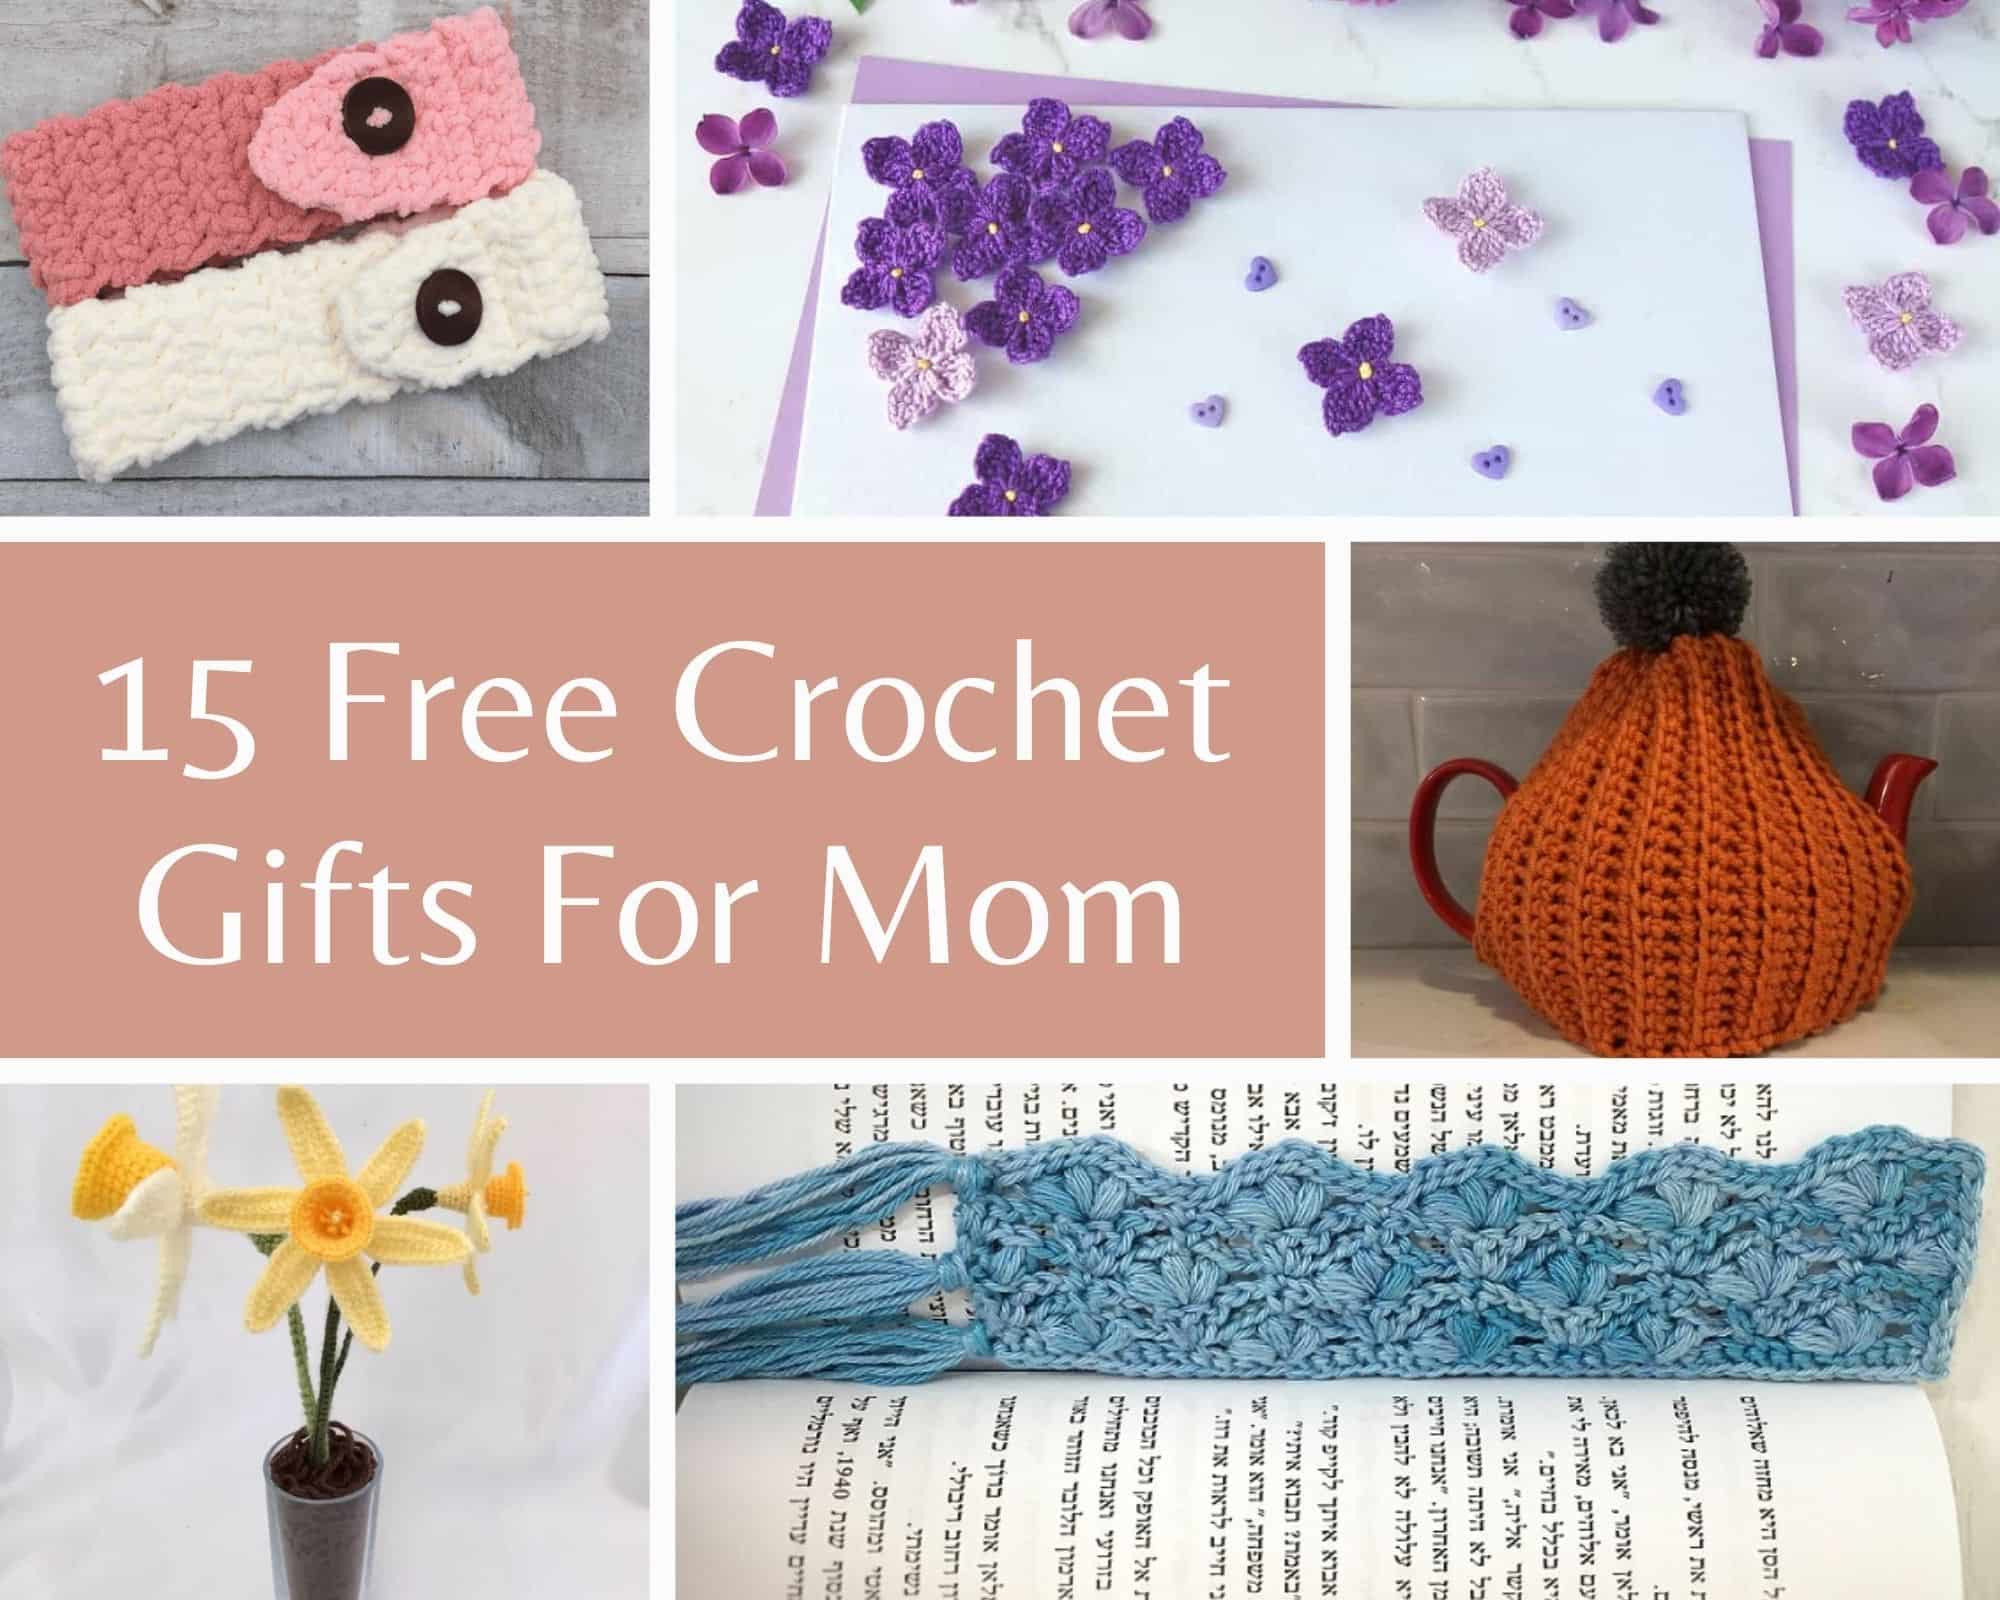 7 Awesome Crochet Mother's Day Blanket Pattern Ideas - Crafting Happiness